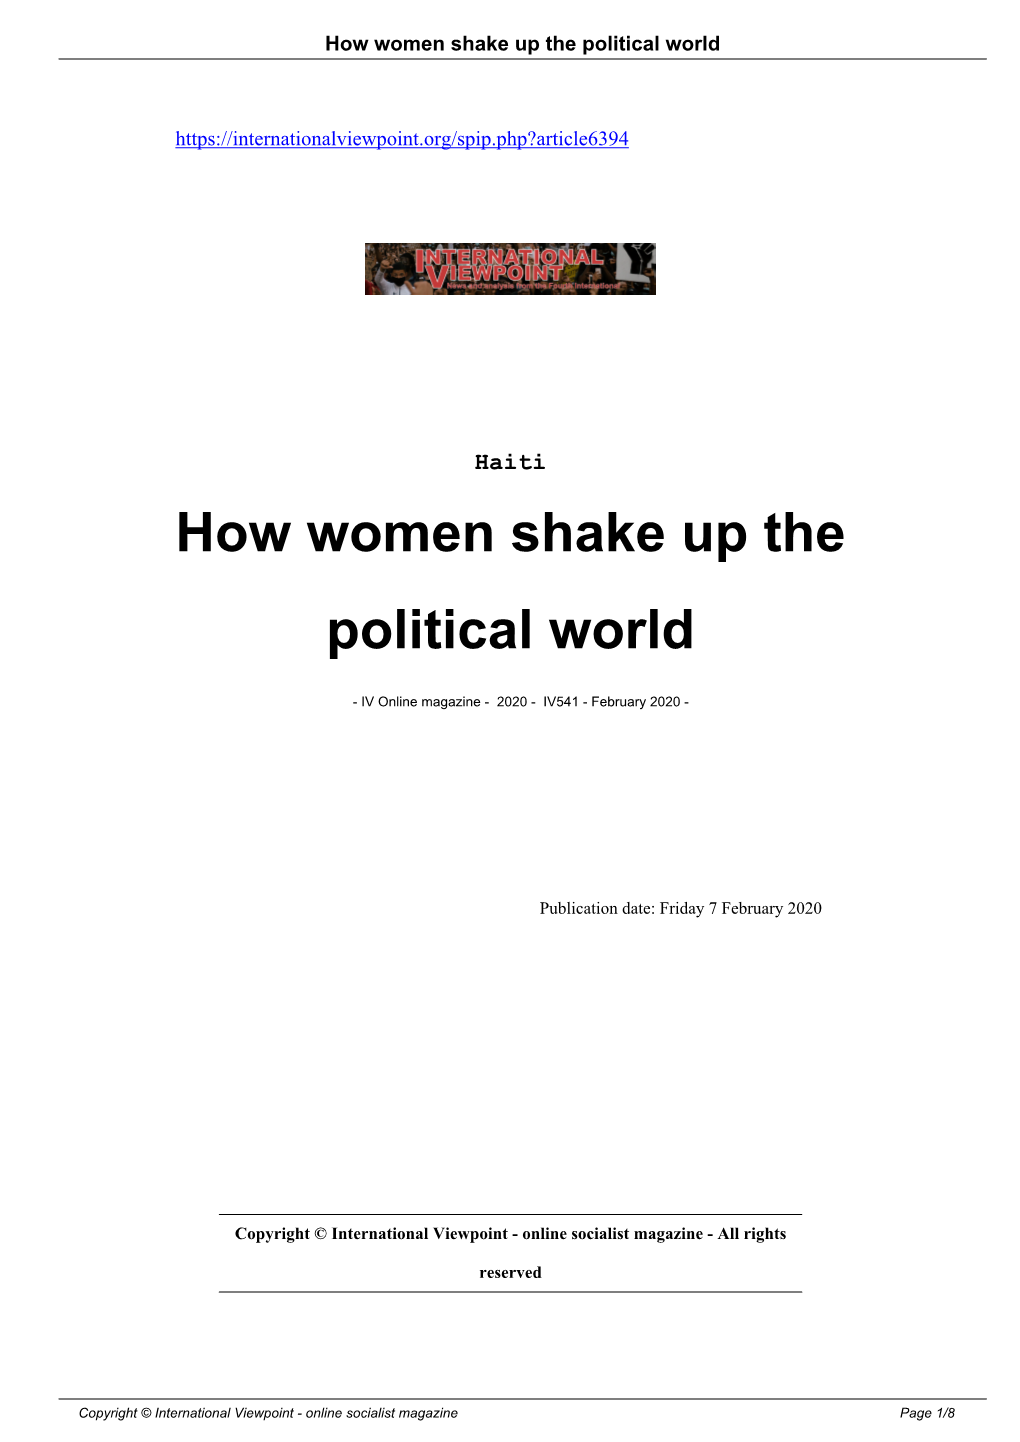 How Women Shake up the Political World